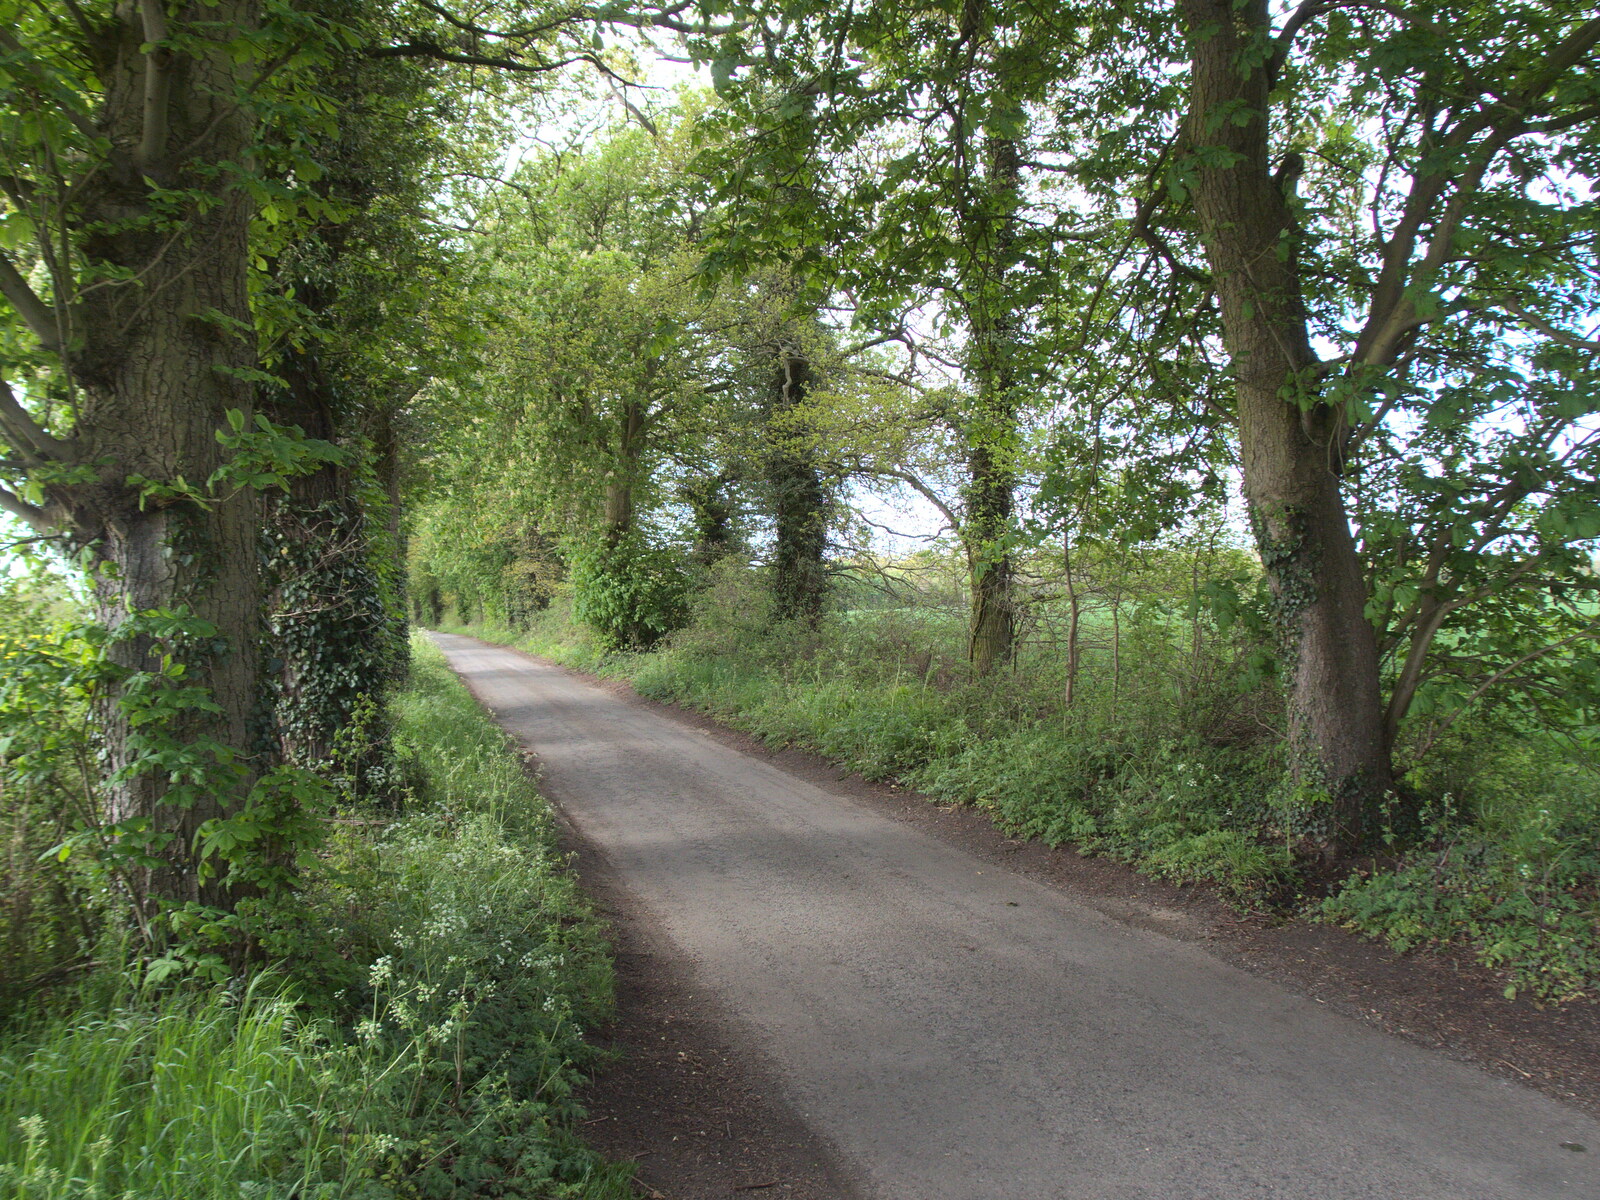 The road to Thornham is all green now from The BSCC at the King's Head, Brockdish, Norfolk - 13th May 2021